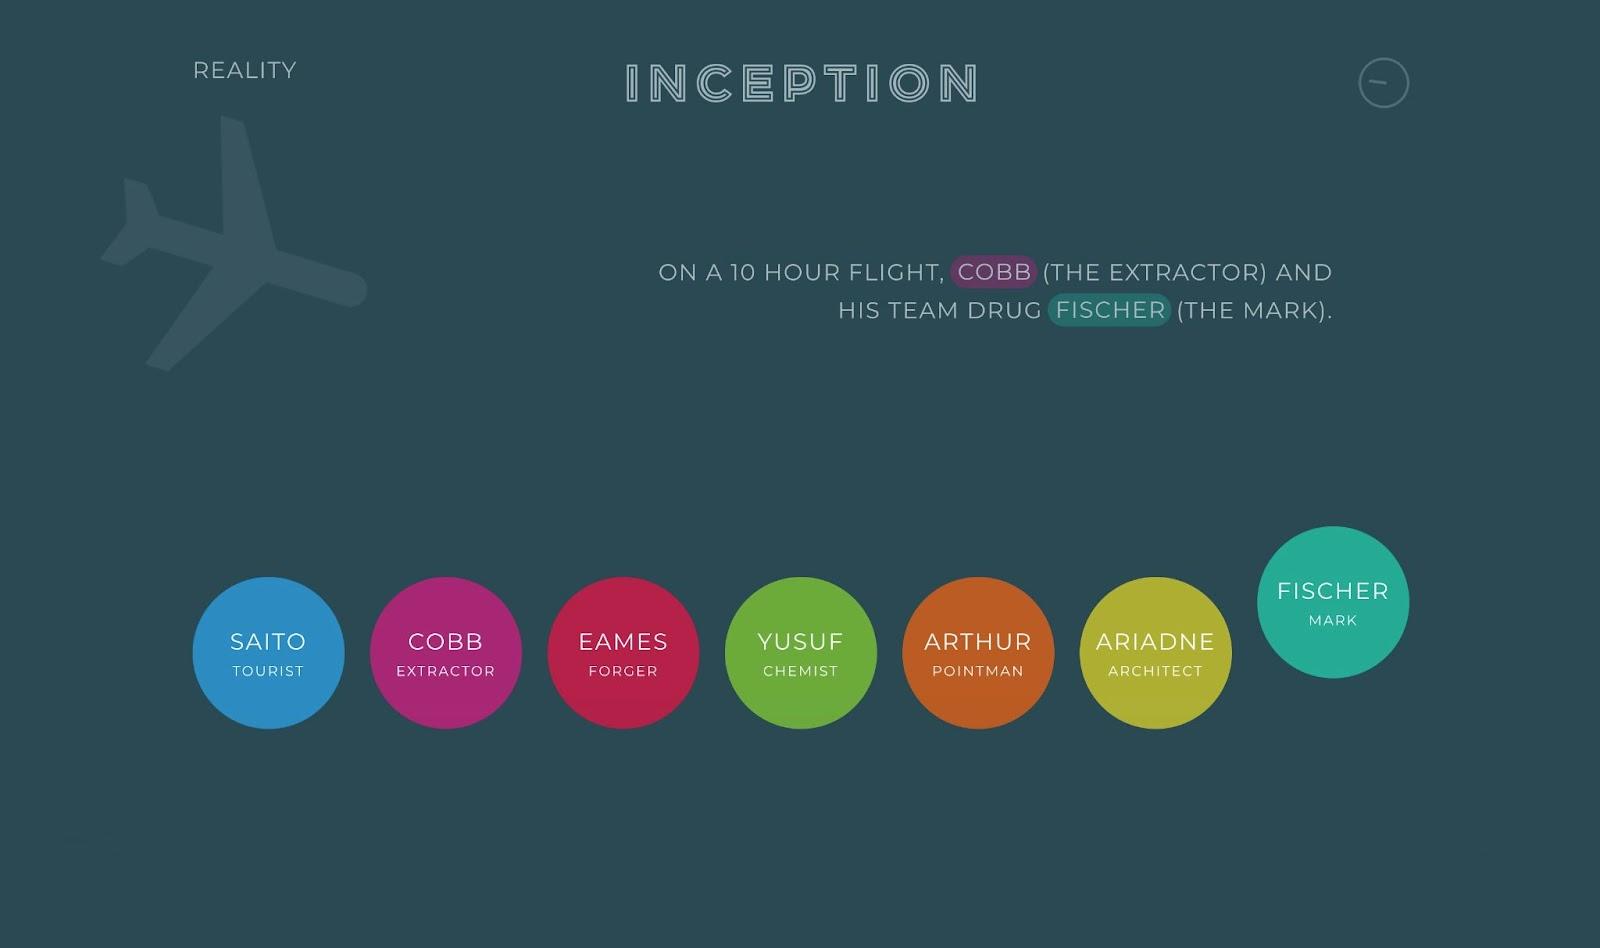 The Inception Explained website offers a great example of how visual storytelling might work